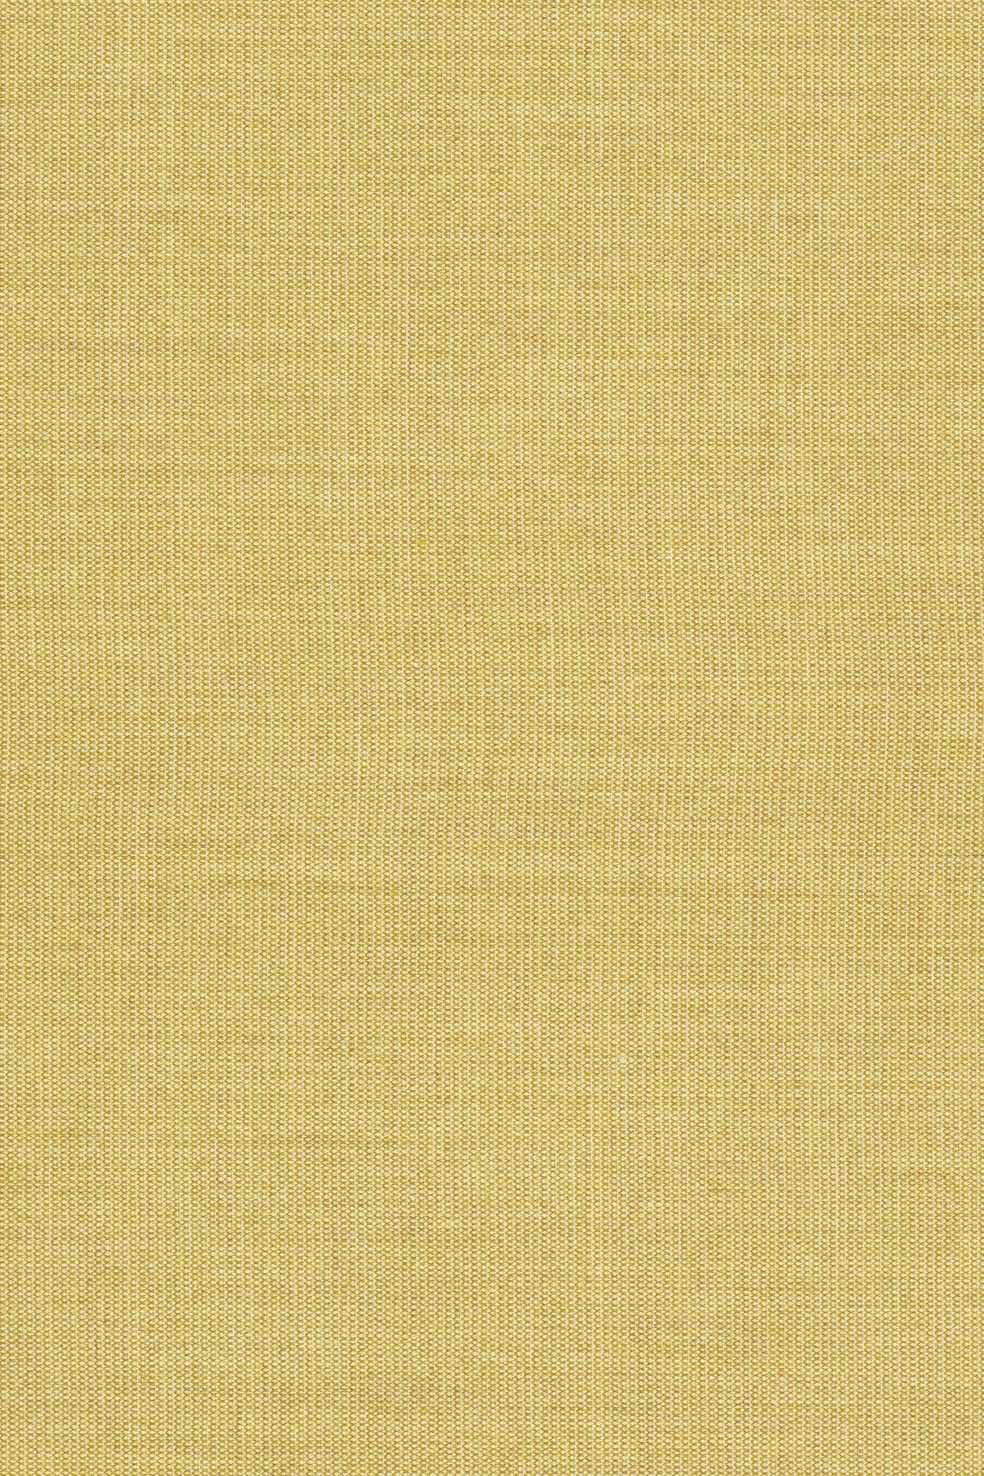 Fabric sample Canvas 2 446 brown